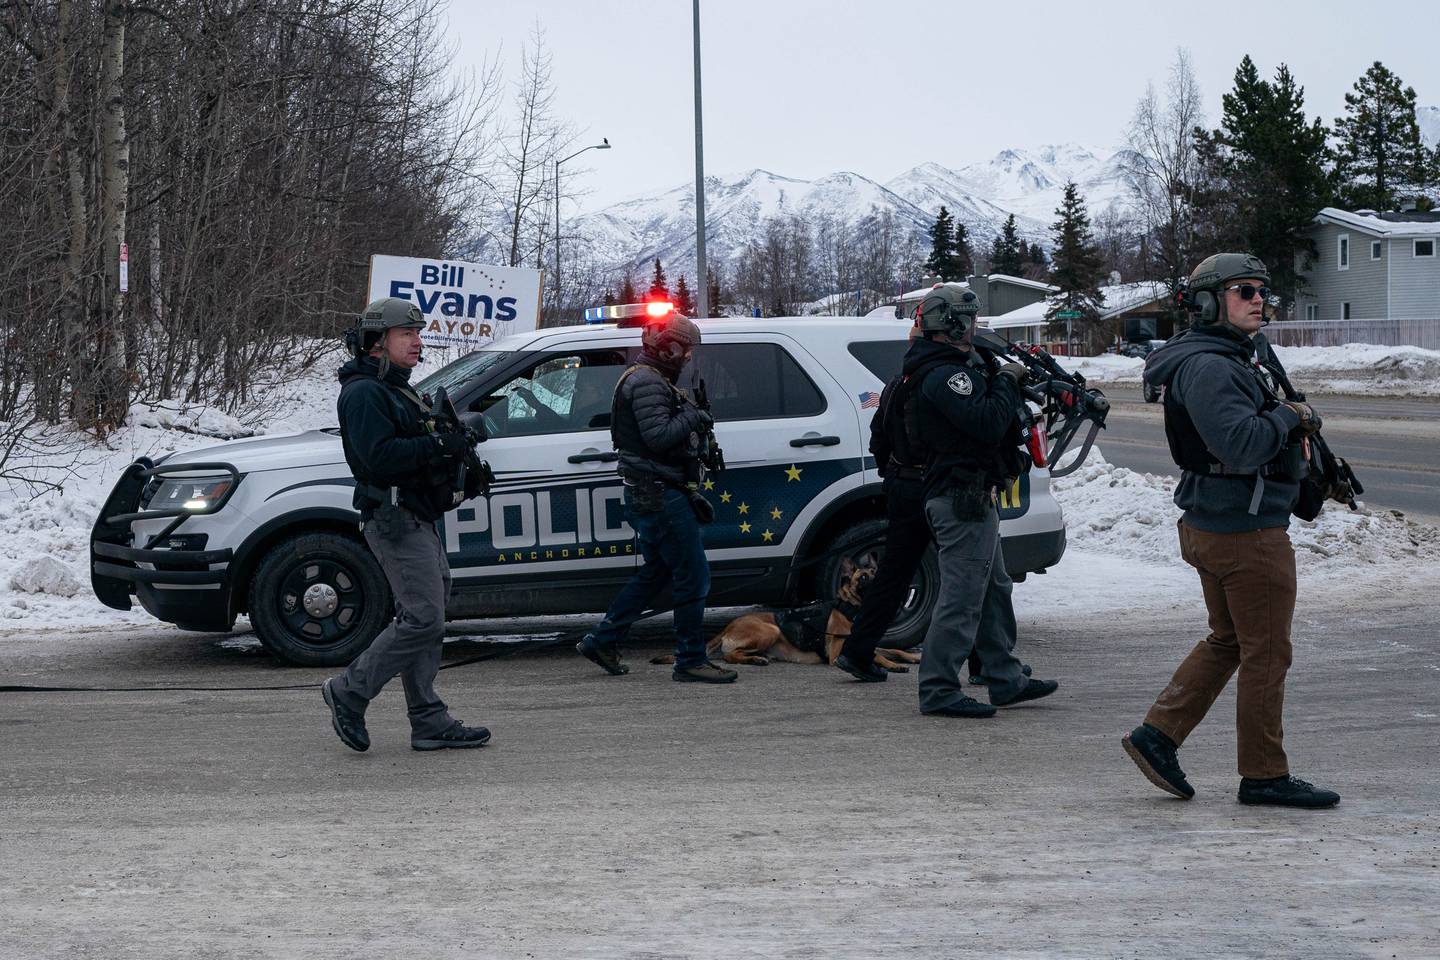 anchorage police, anchorage police department, apd, cops, police, swat, swat team